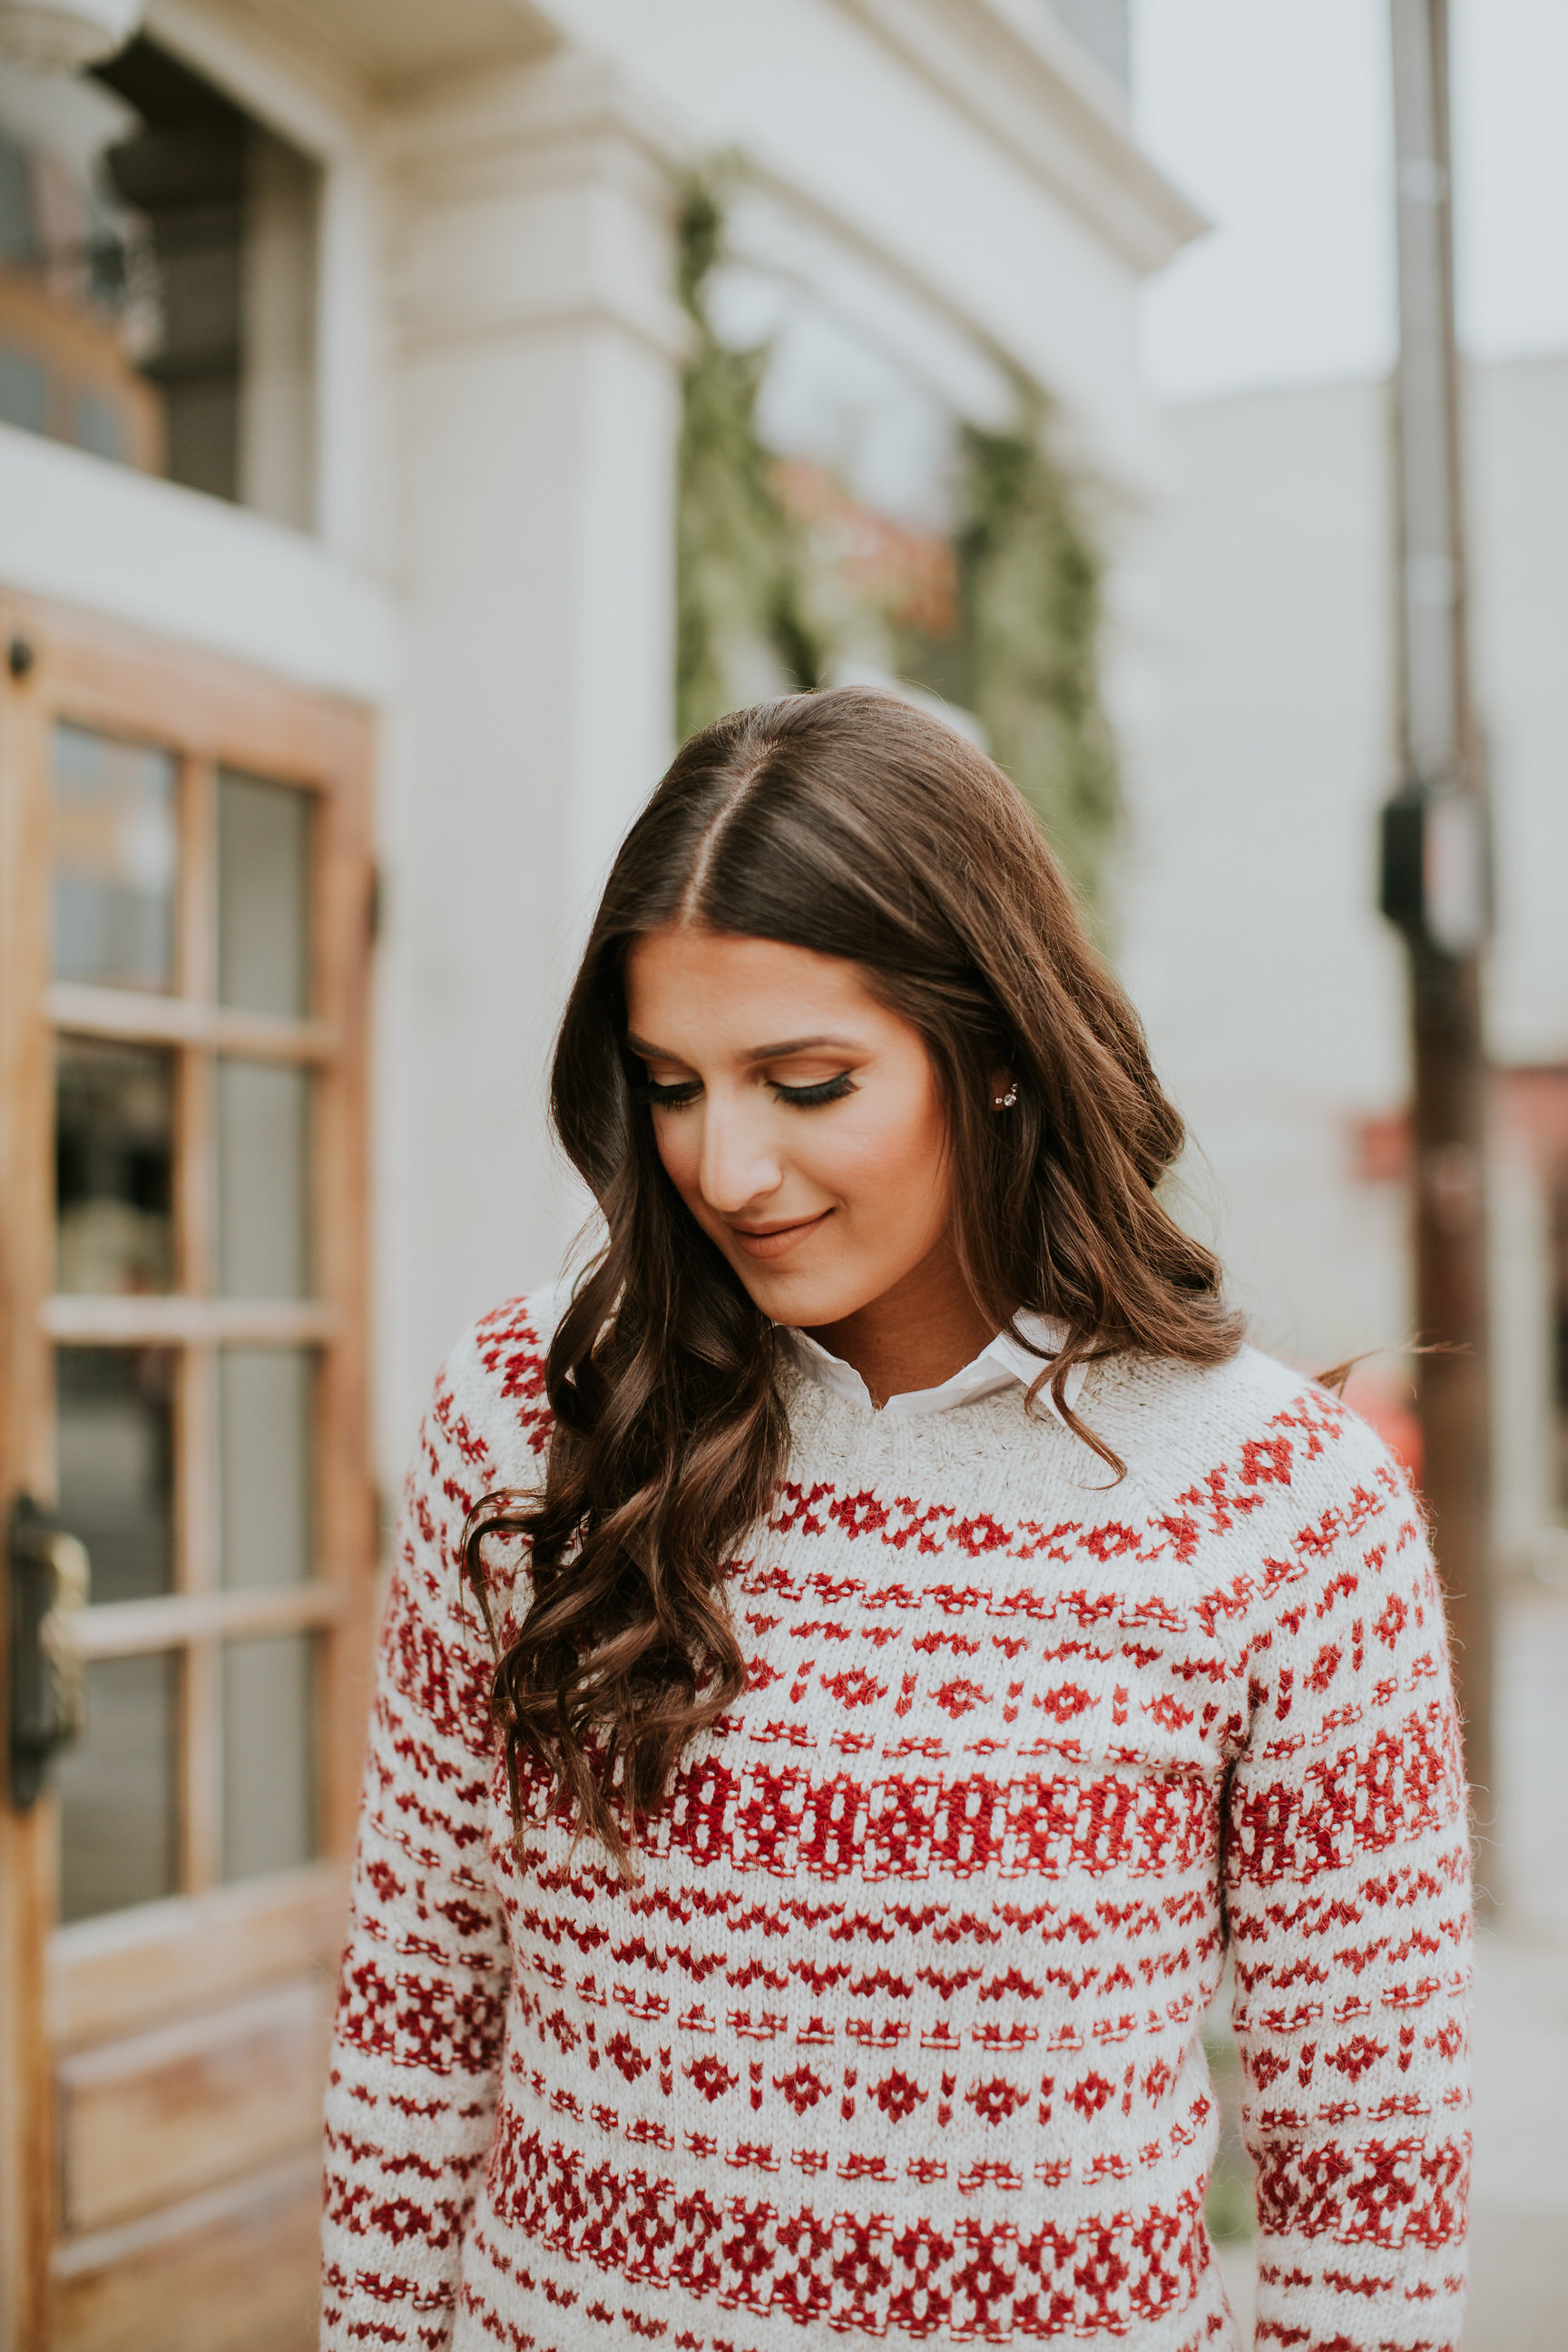 holiday sweater, fair isle sweater, holiday fair isle, abercrombie and fitch sweater, christmas sweater, christmas outfit, holiday outfit, winter style, winter fashion // grace wainwright a southern drawl